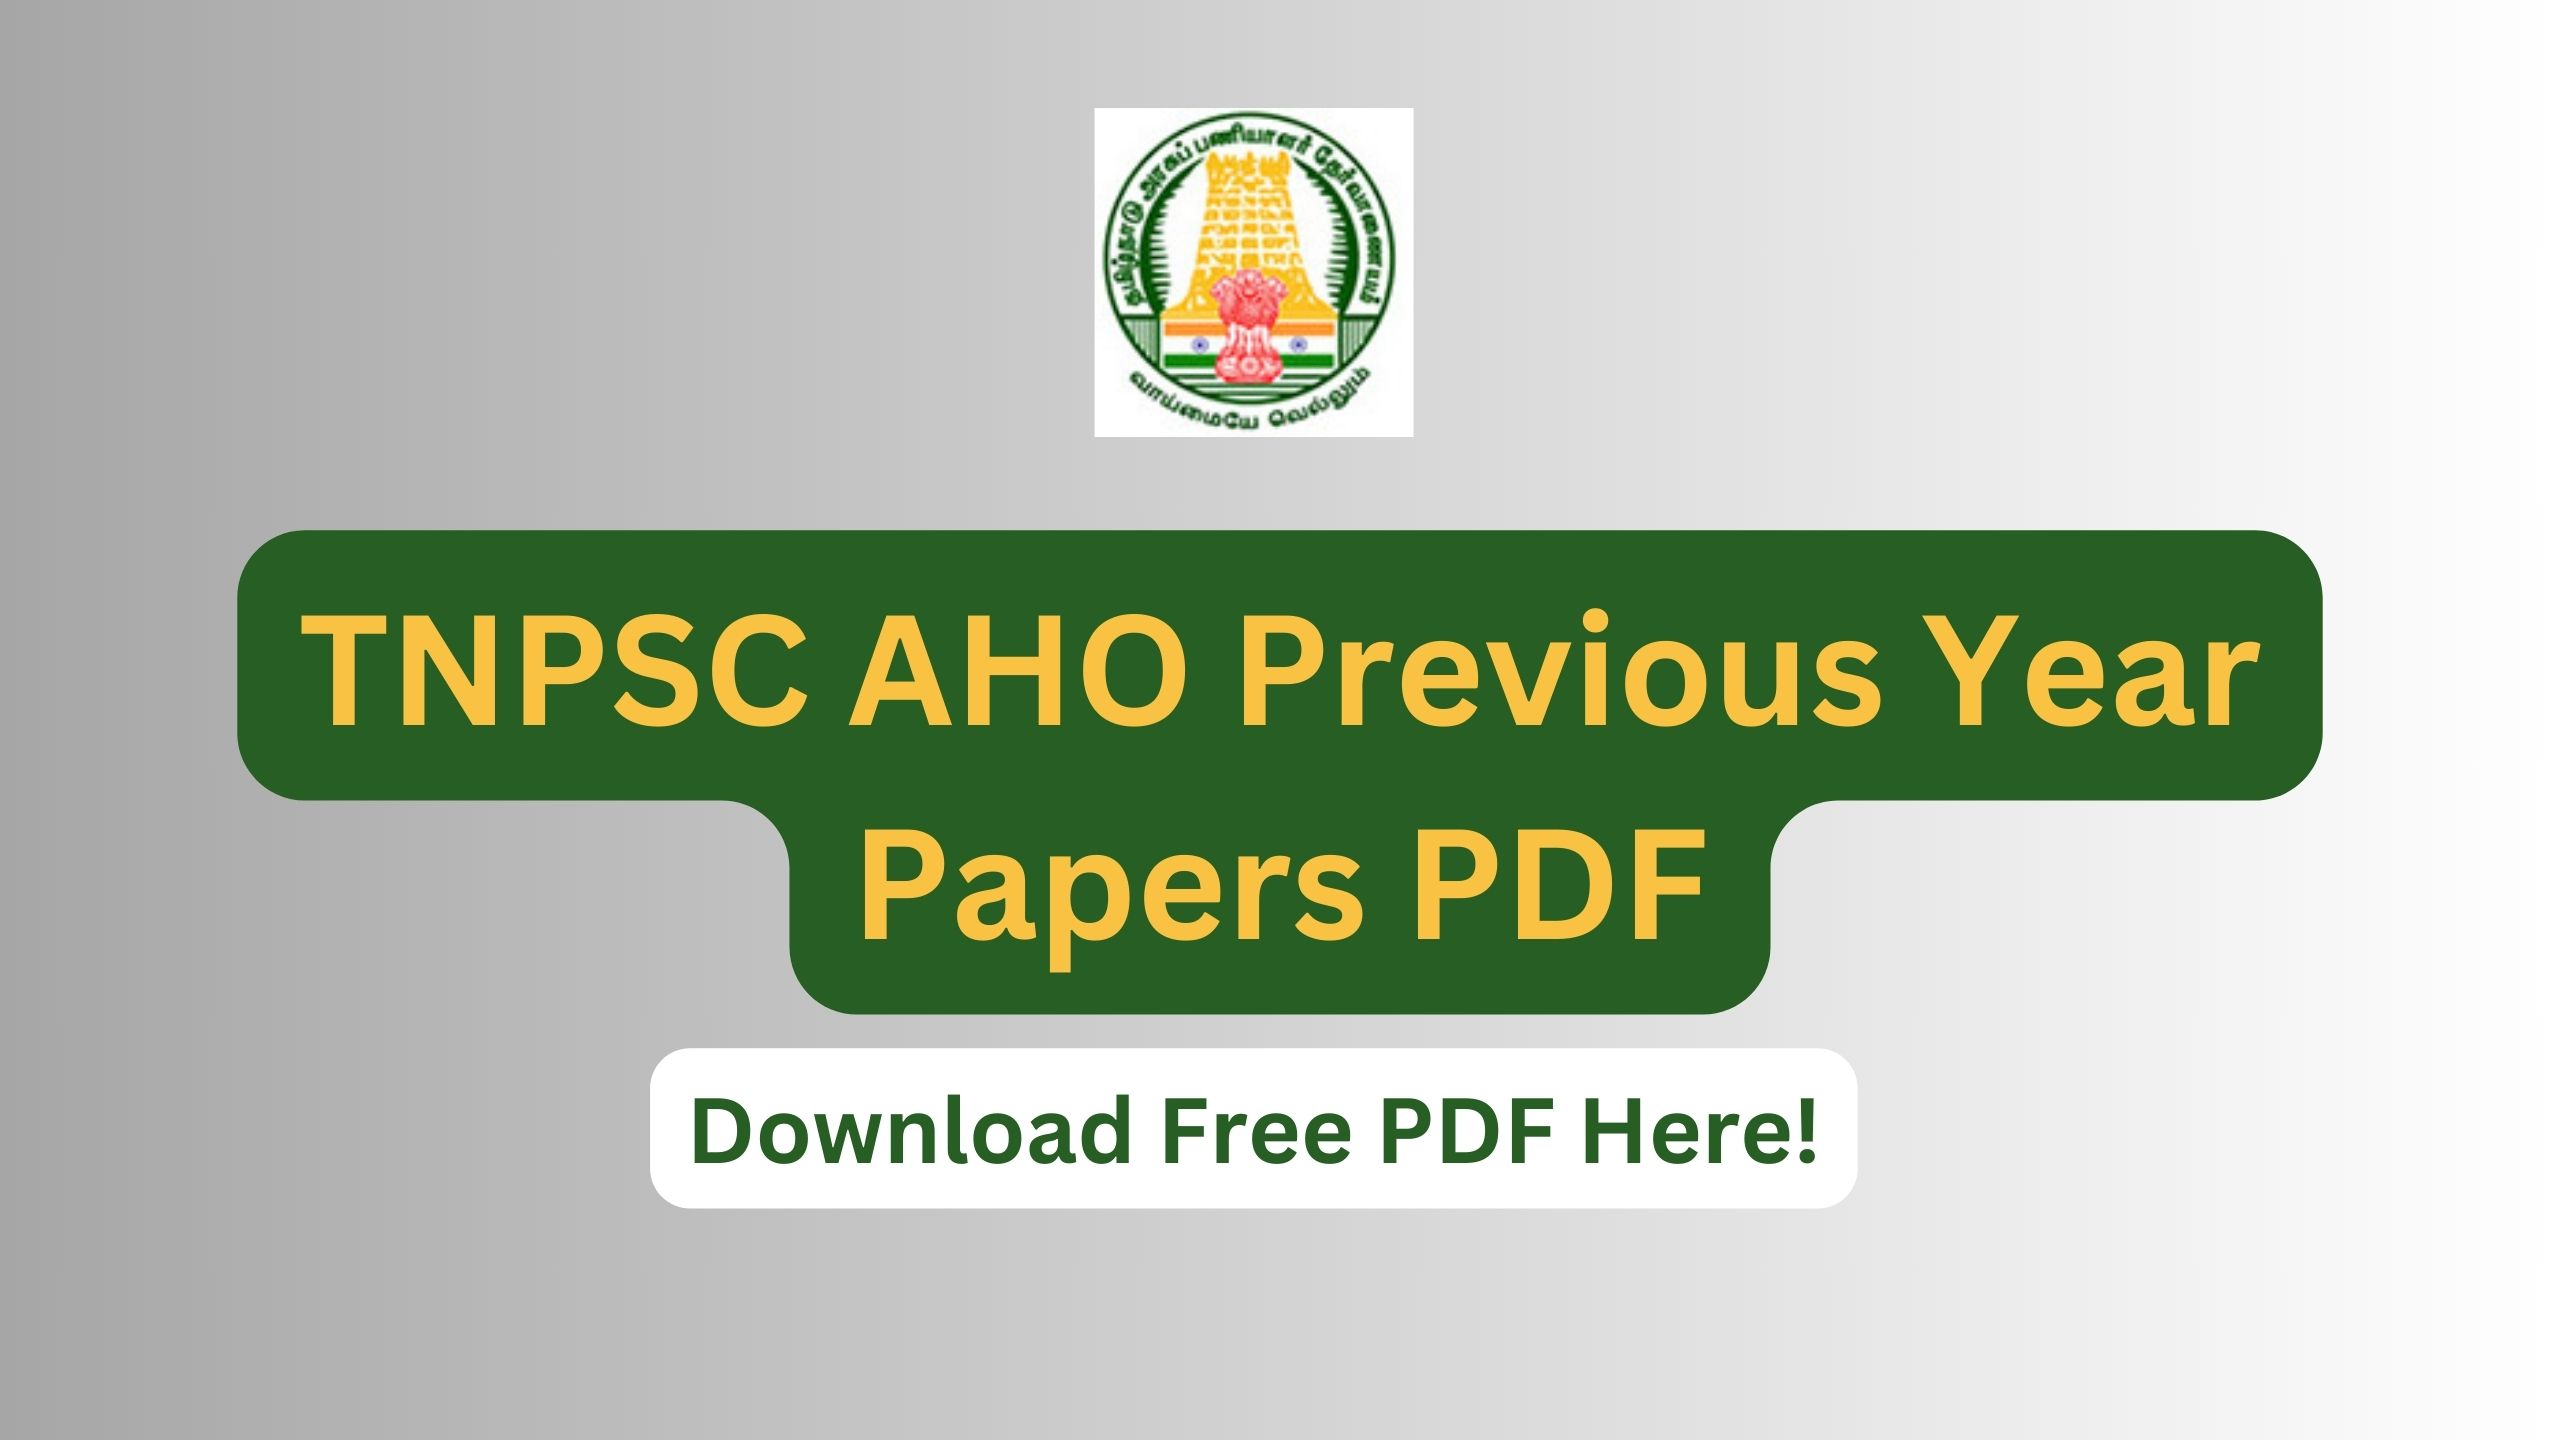 TNPSC AHO Previous Year Papers PDF